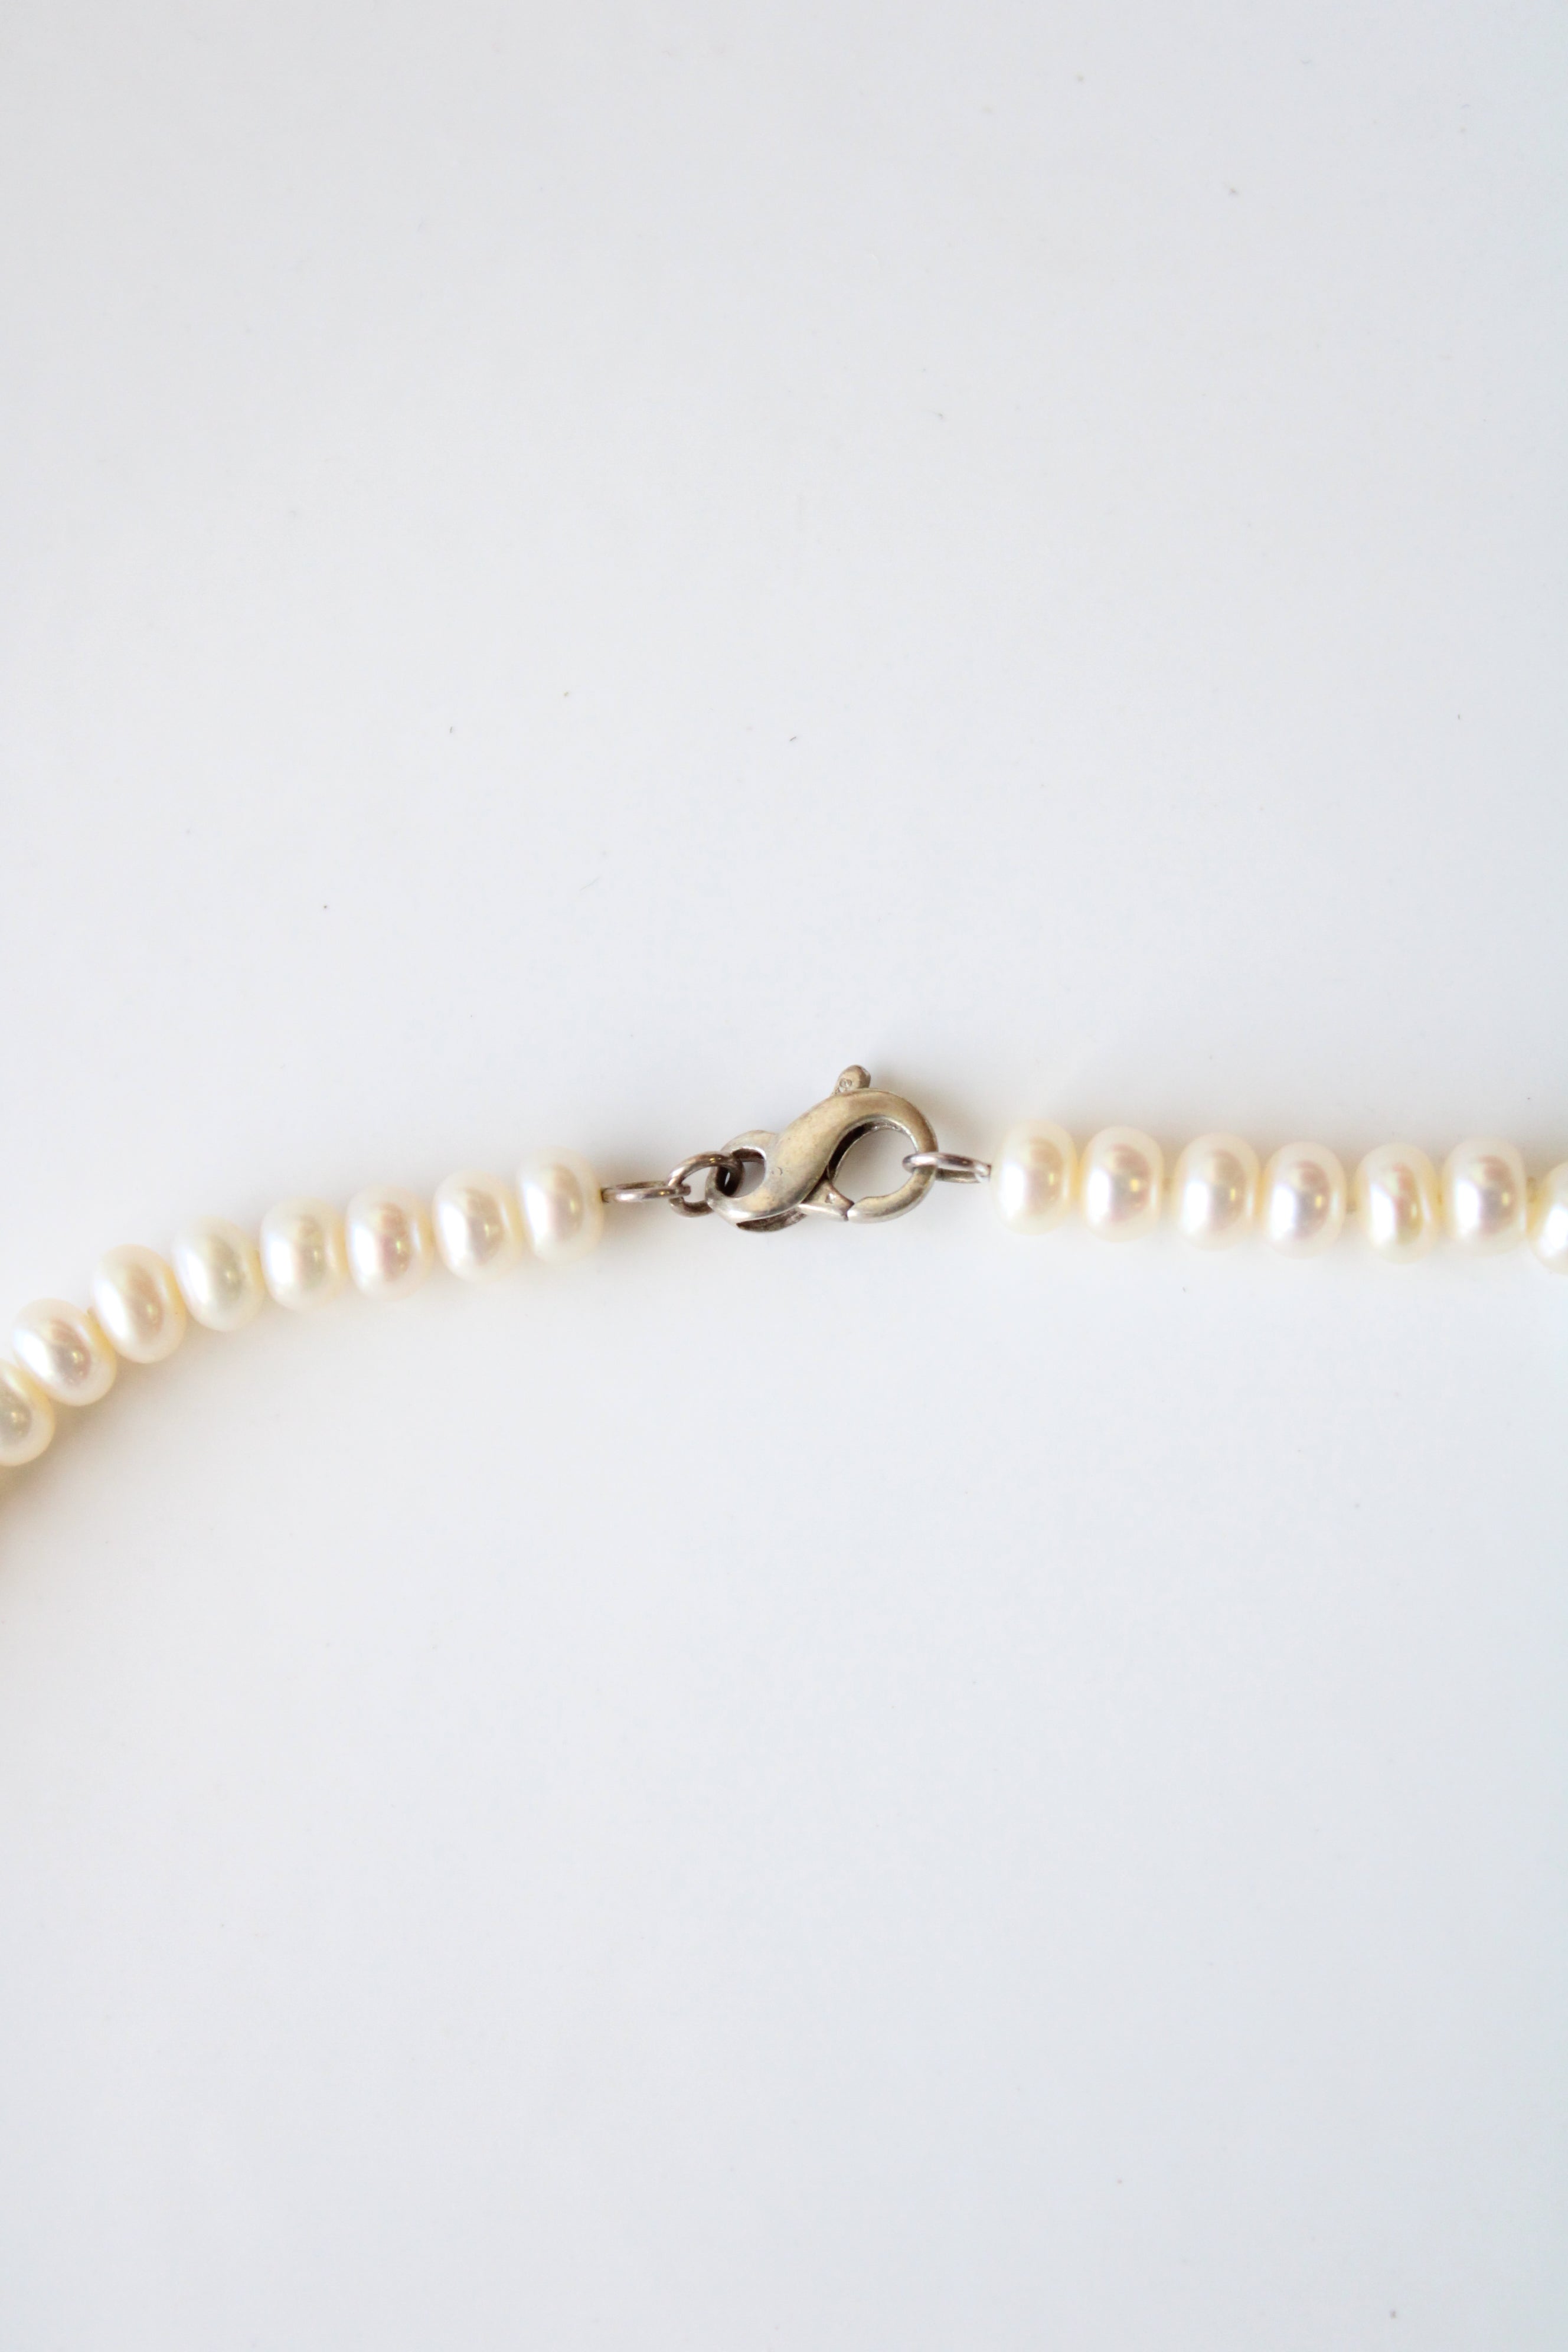 Genuine Ivory Pearl & Sterling Silver Beaded Necklace